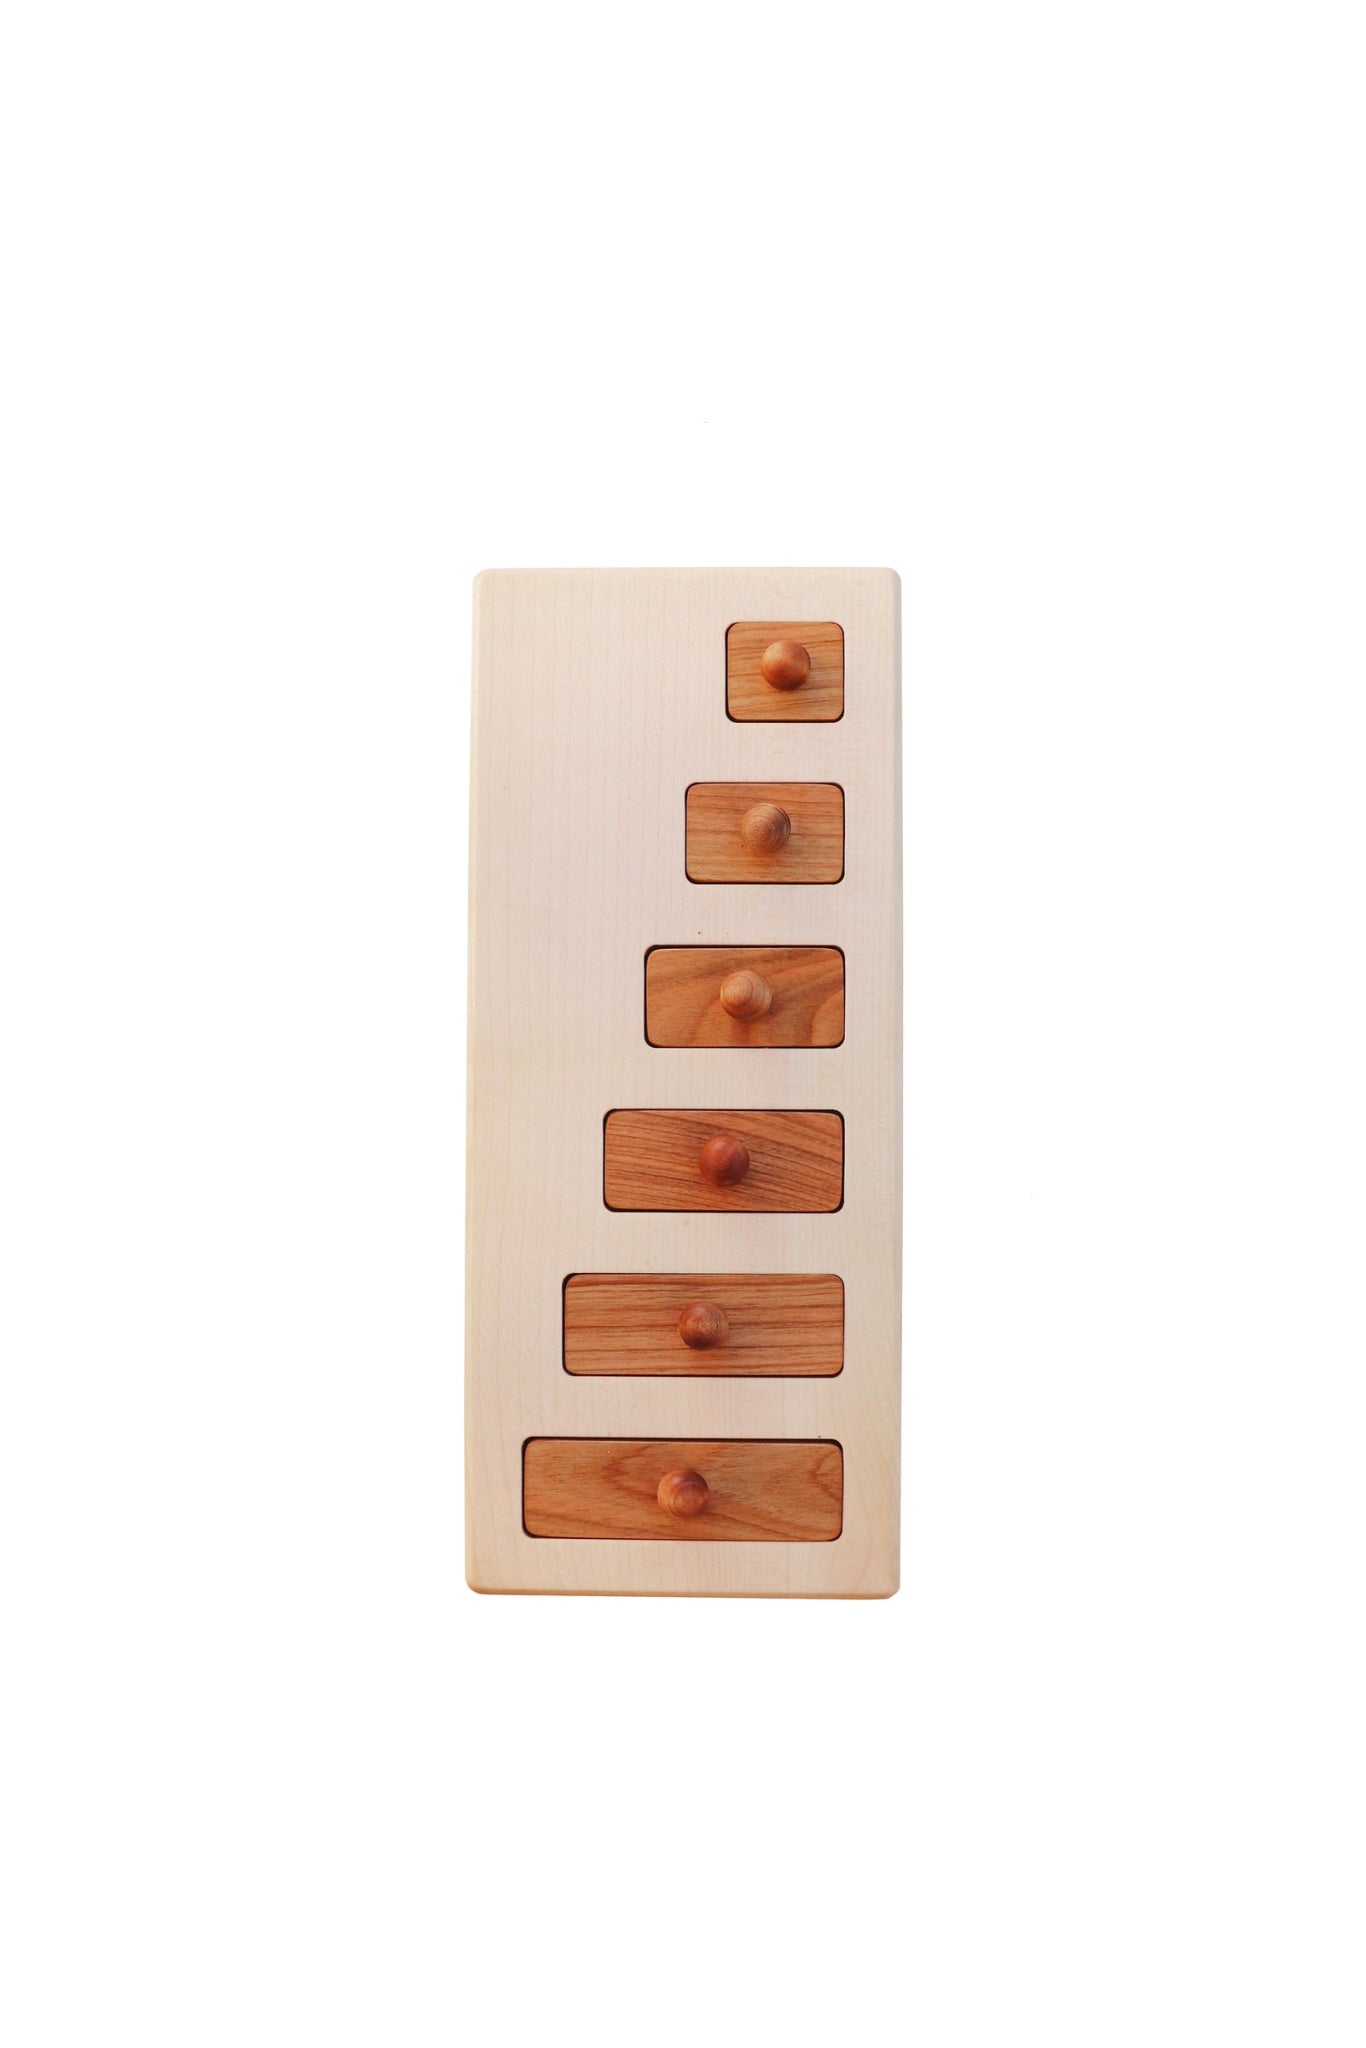 Wooden Story - Montessori Long-Short Puzzle - Playlaan